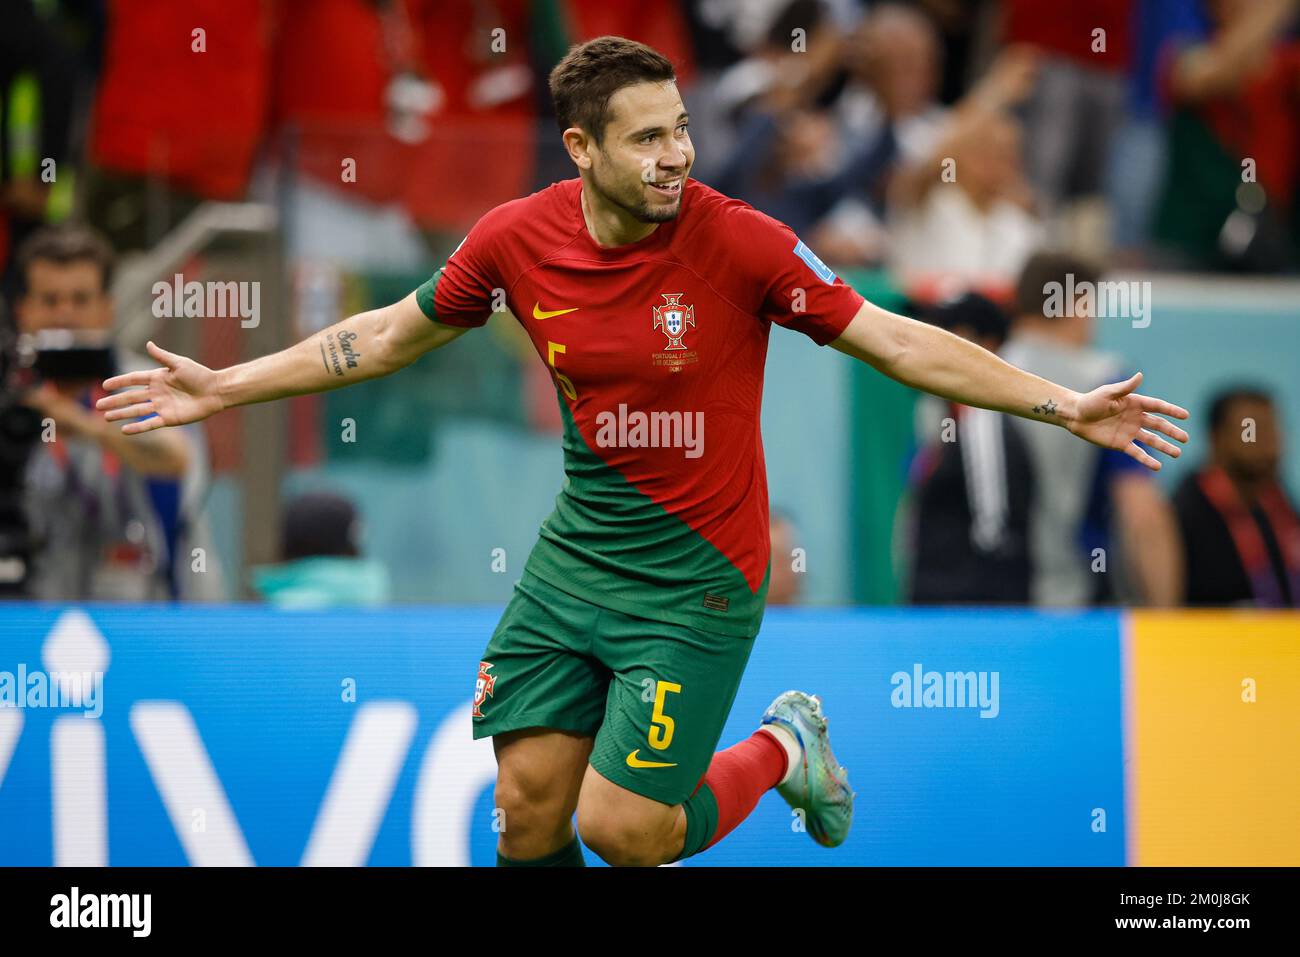 Lusail, Catar. 06th Dec, 2022. RAPHAEL GUERREIRO of Portugal celebrates his goal during a match between Portugal vs Su? a, valid for the Round of 16 of the World Cup, held at the Lusail National Stadium in Lusail, Qatar. Credit: Rodolfo Buhrer/La Imagem/FotoArena/Alamy Live News Stock Photo